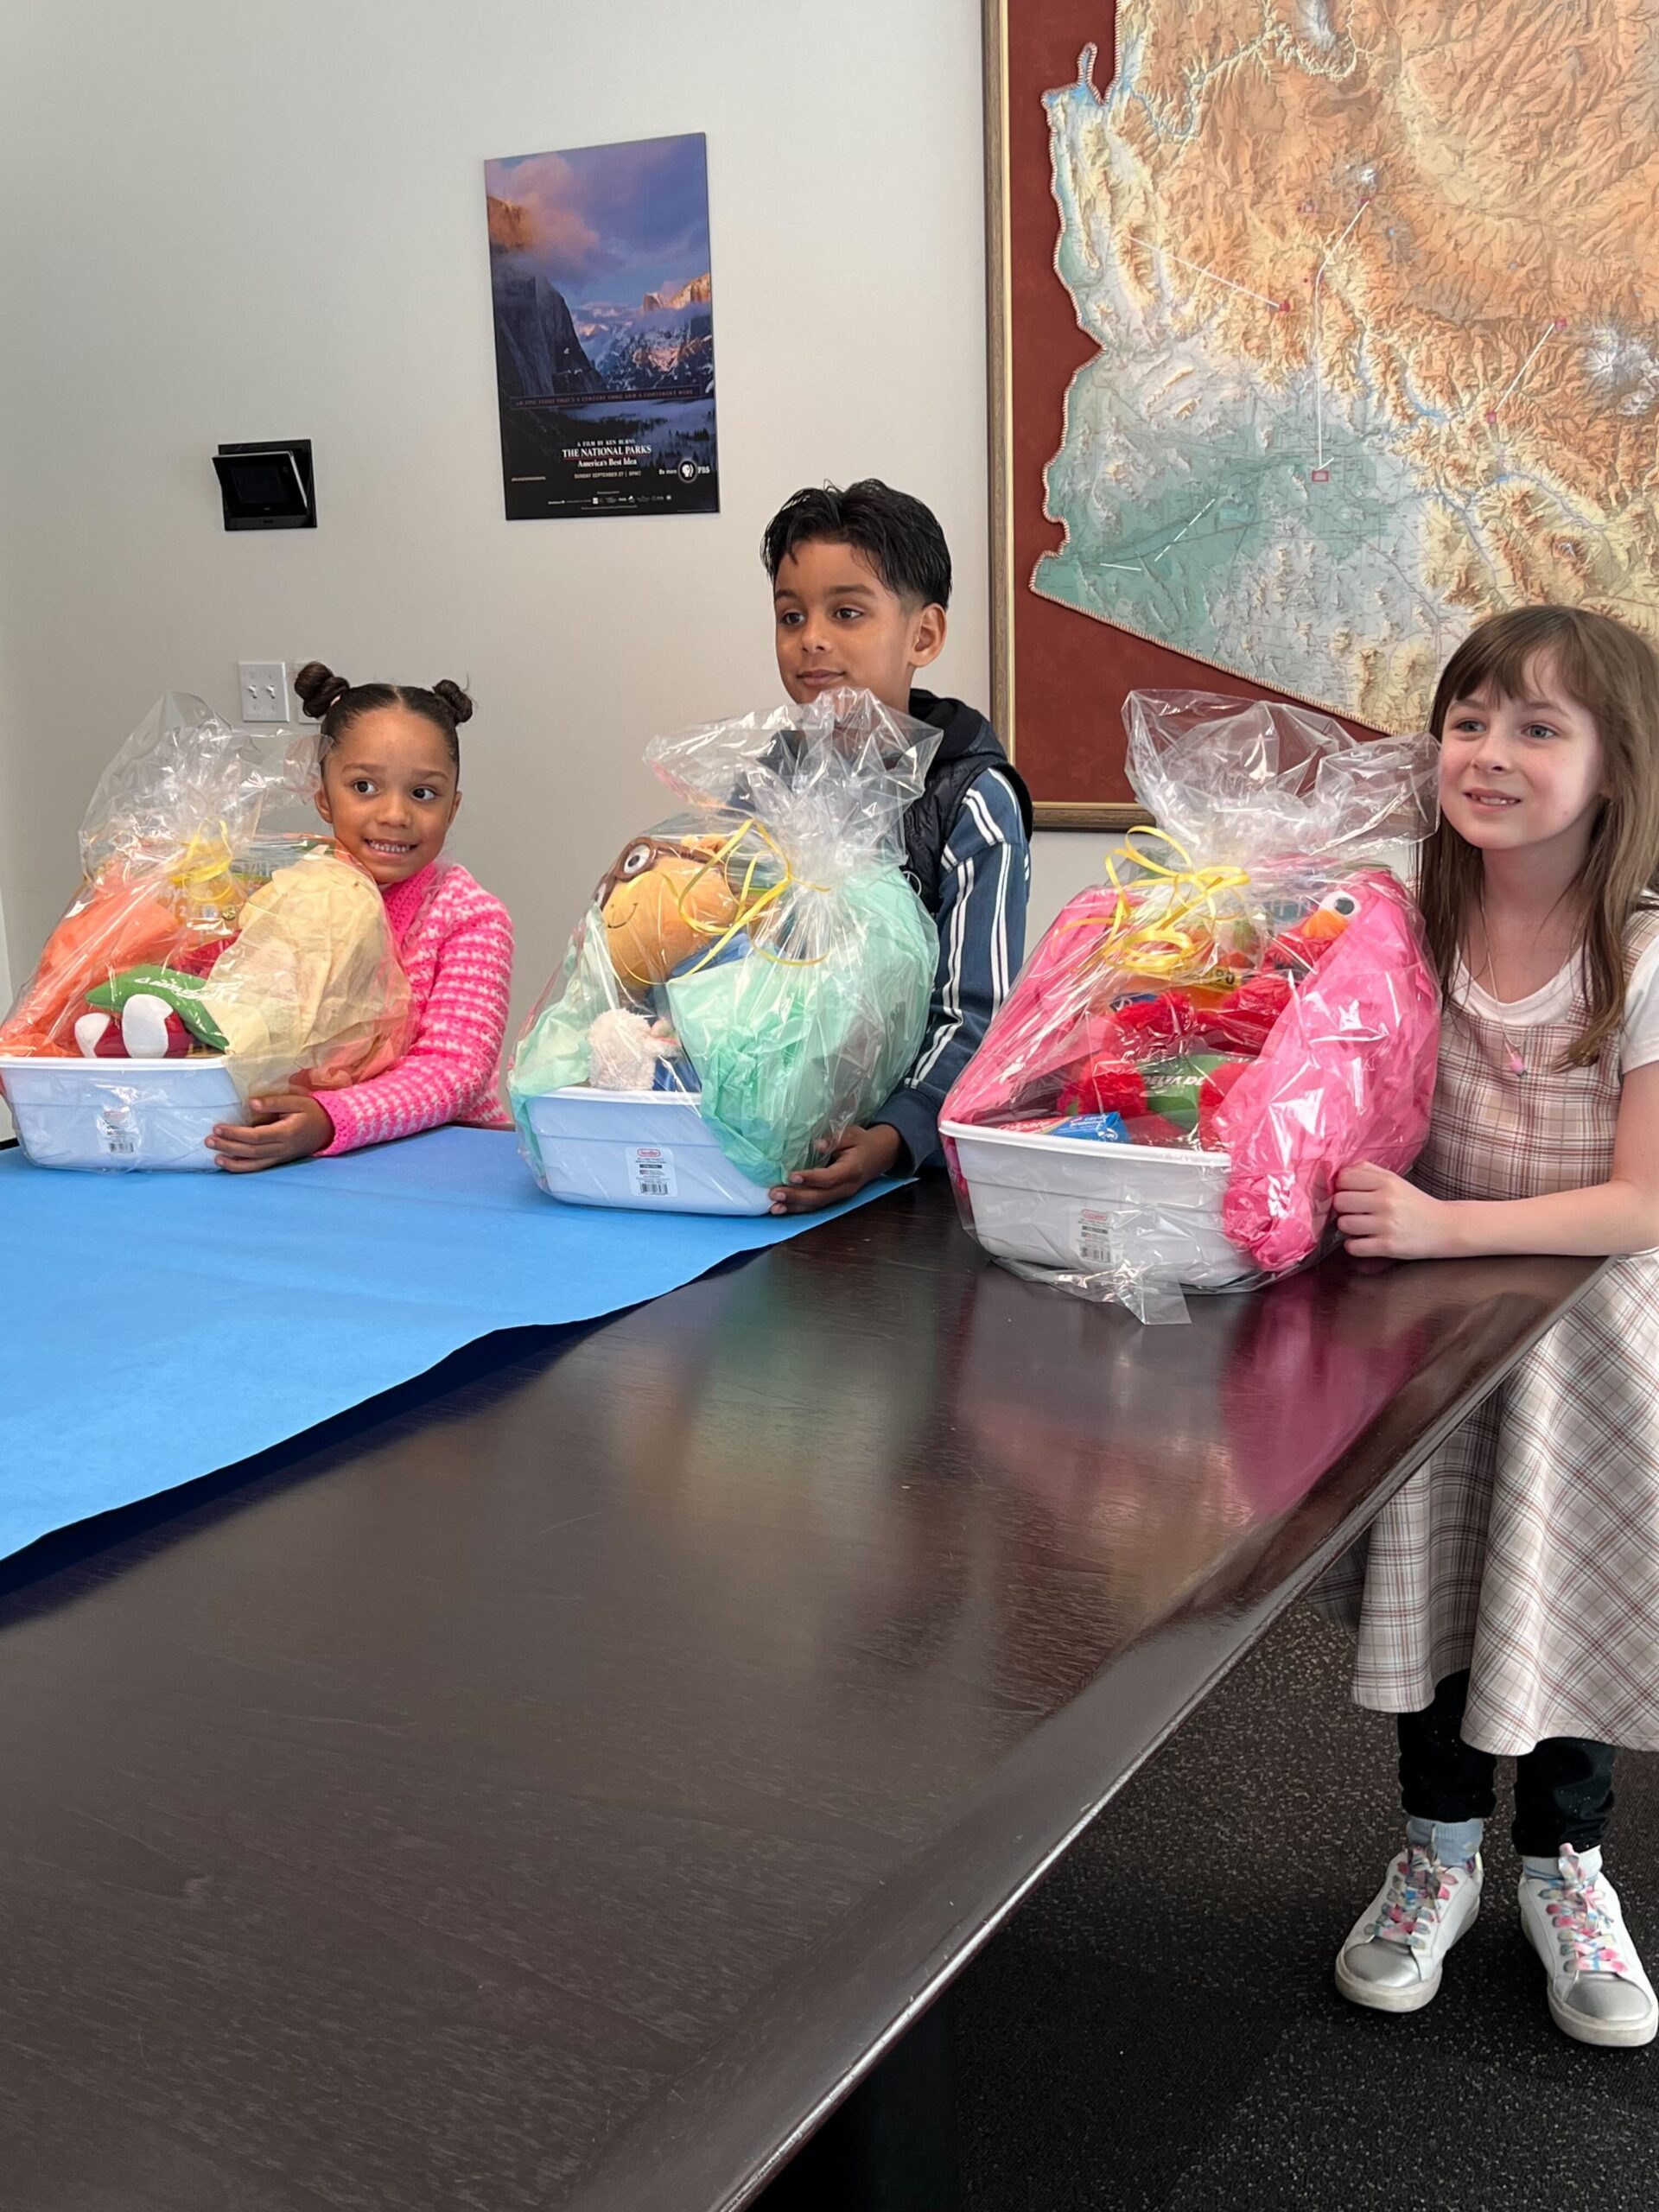 Children pose with prize baskets.